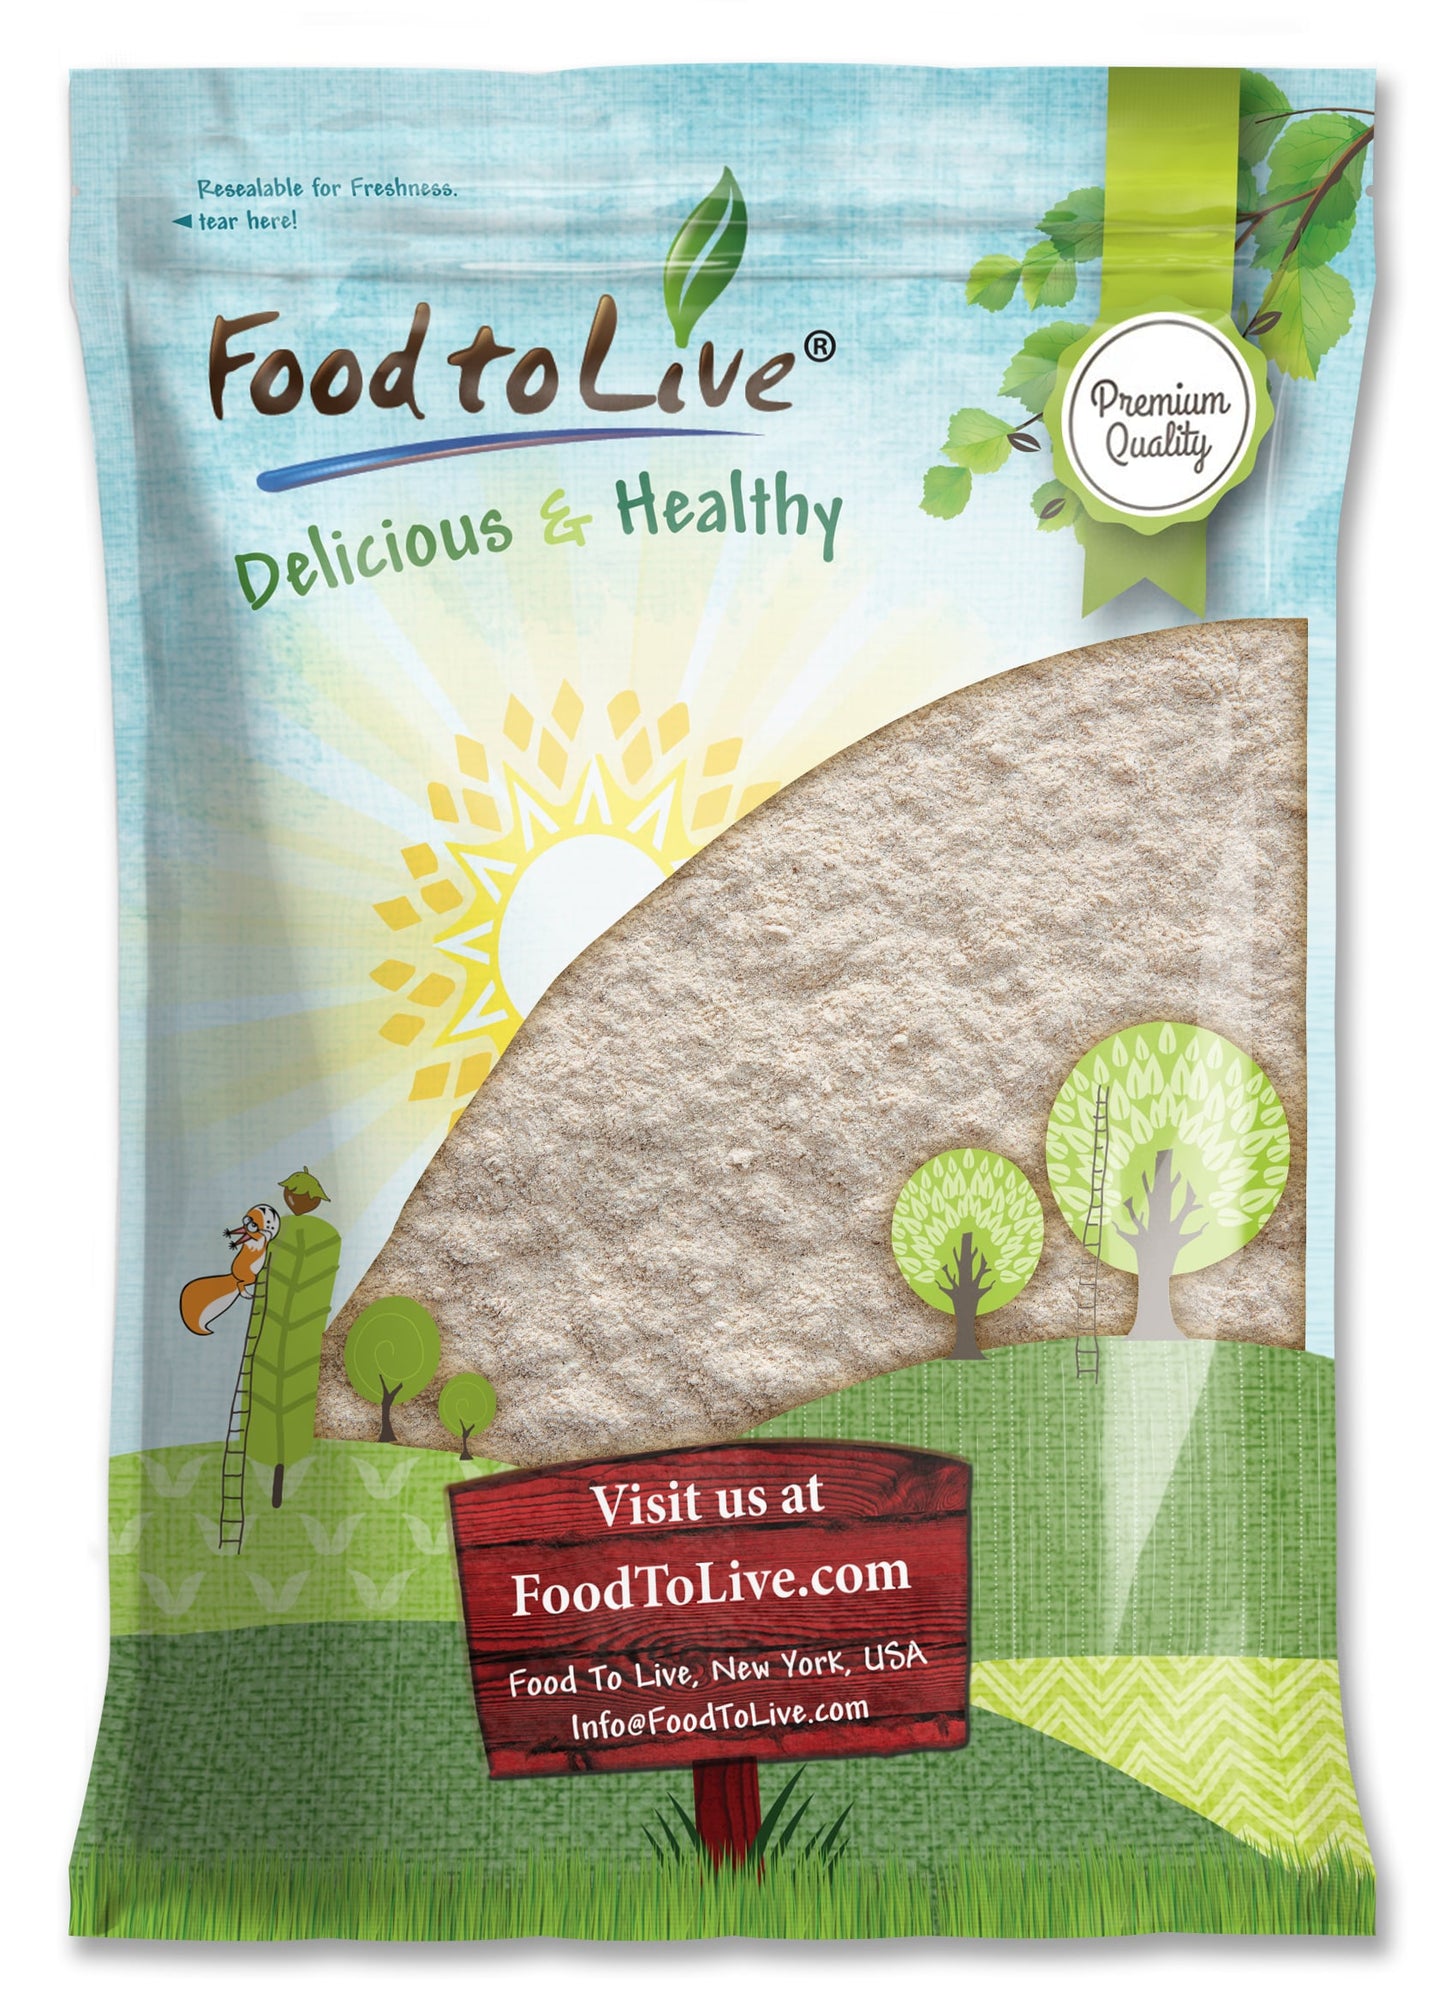 Amaranth Flour – Non-GMO Verified, Finely Milled Whole Amaranth Grains, Vegan, Kosher, Bulk. High in Dietary Fiber and Plant-Based Protein. Great Wheat Flour Substitute. Perfect for Baking